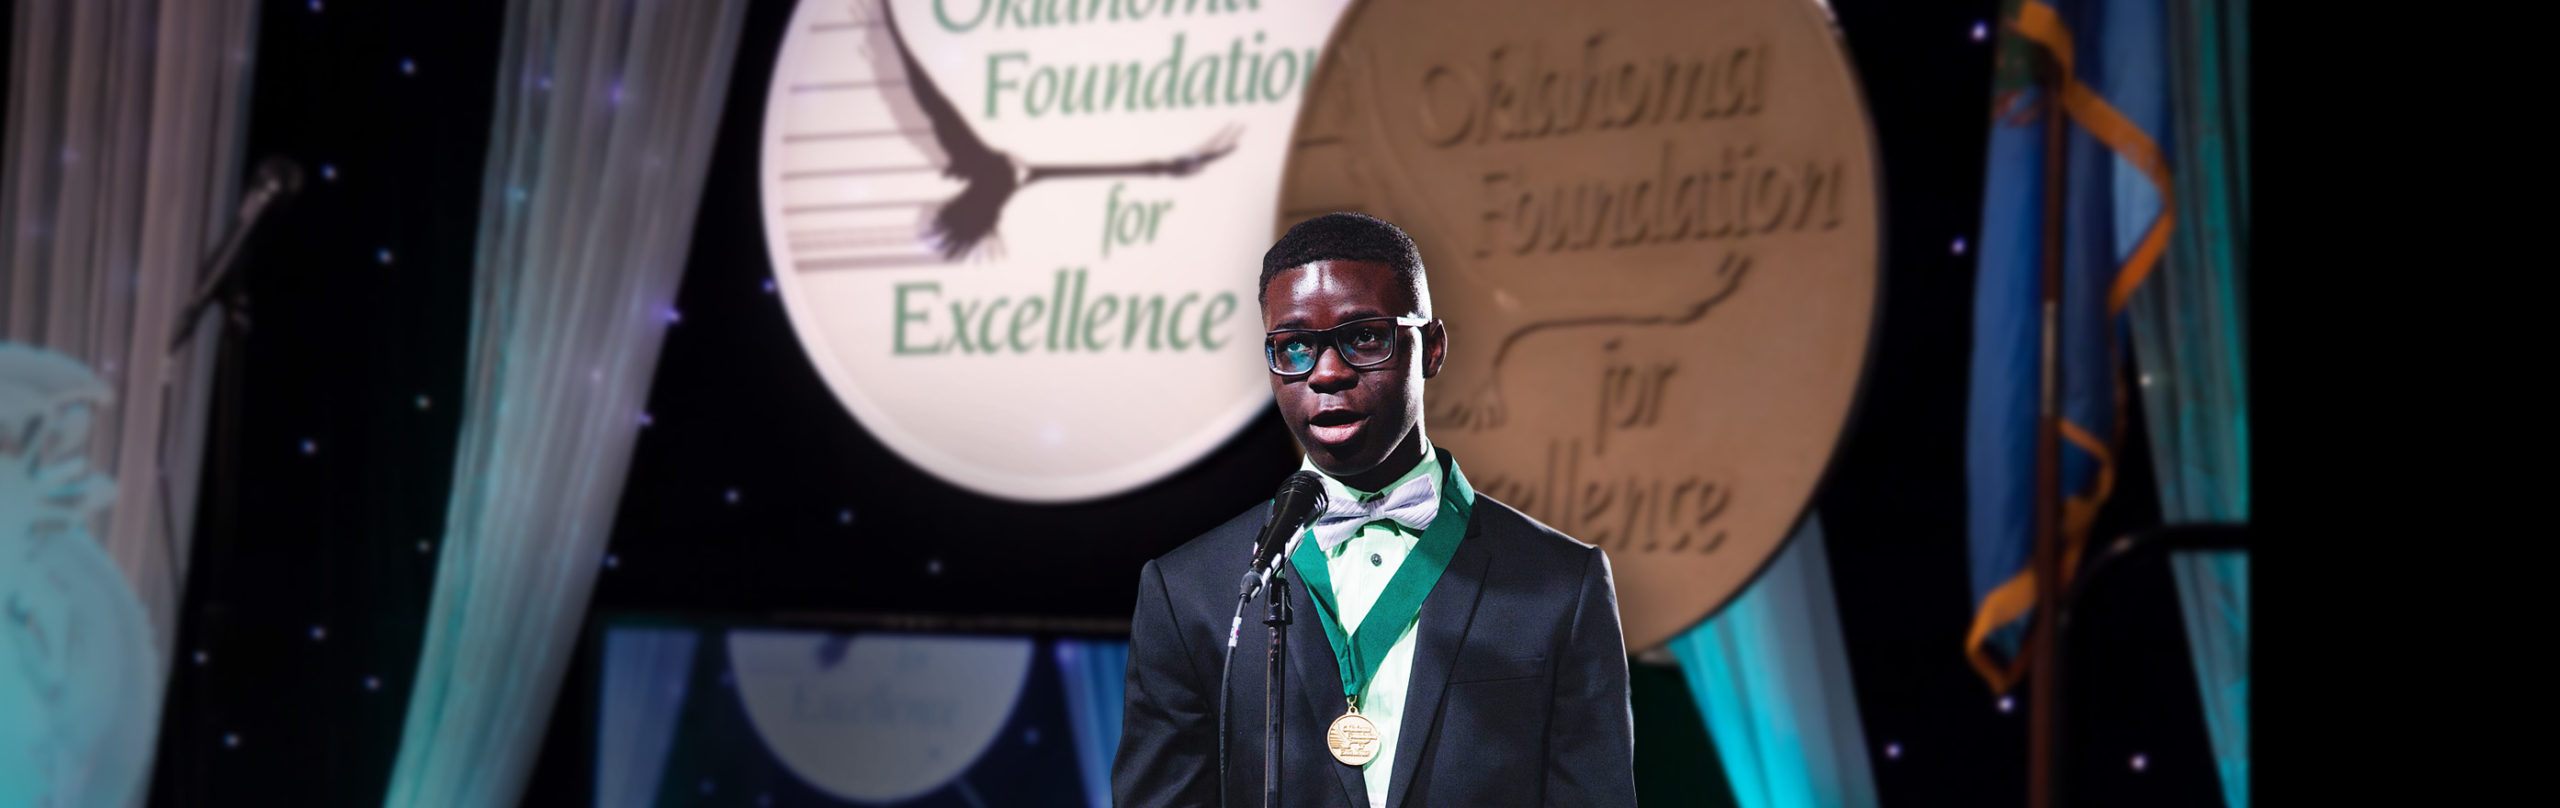 Oklahoma Foundation for Excellence Seeking Nominations for 2021 Academic All-State Scholars